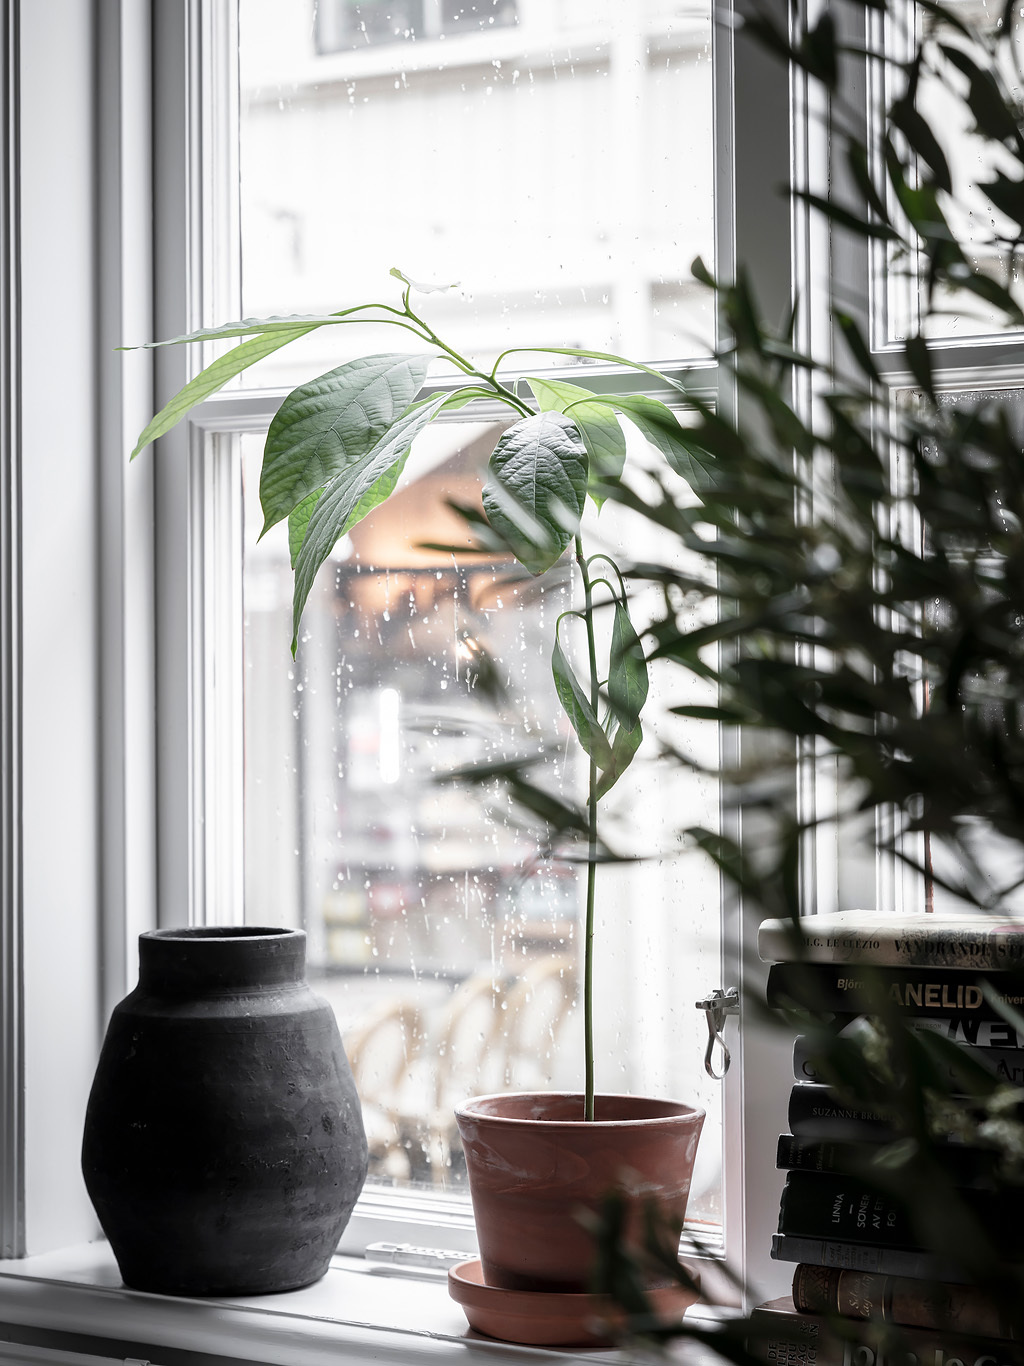 Let Plants bath in the sun or idly watch the rain on the window